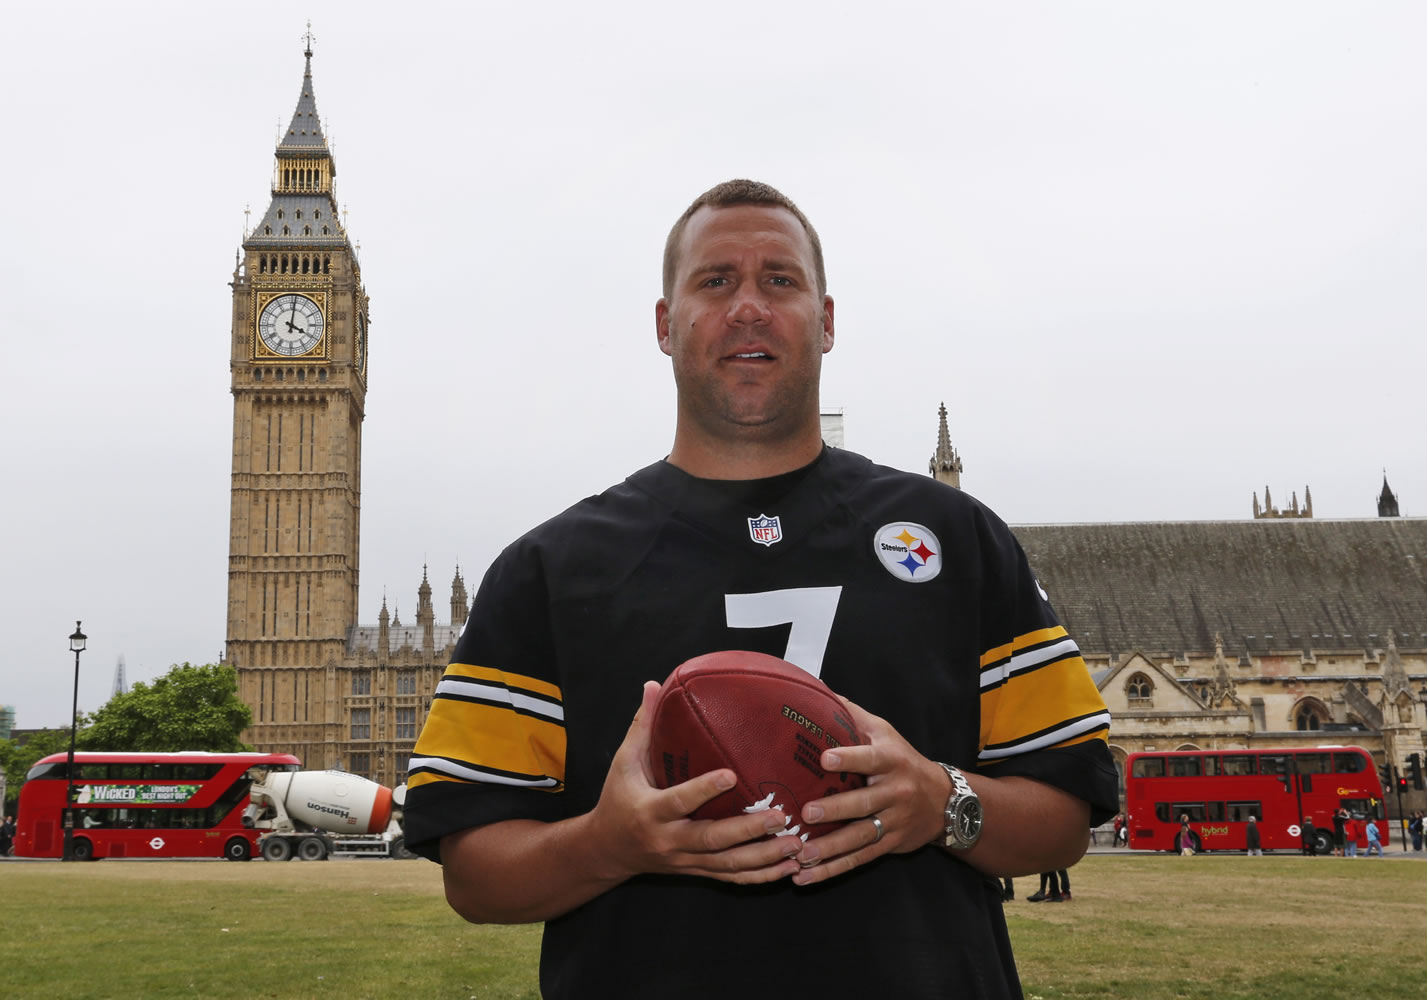 Ben Roethlisberger, quarterback of the Pittsburgh Steelers, poses for photographers, backdropped by the Houses of Parliament and Big Ben in central London, Tuesday, July 2, 2013. Pittsburgh Steelers will play against the Minnesota Vikings at Wembley Stadium in London, on Sunday Sept. 29, 2013.